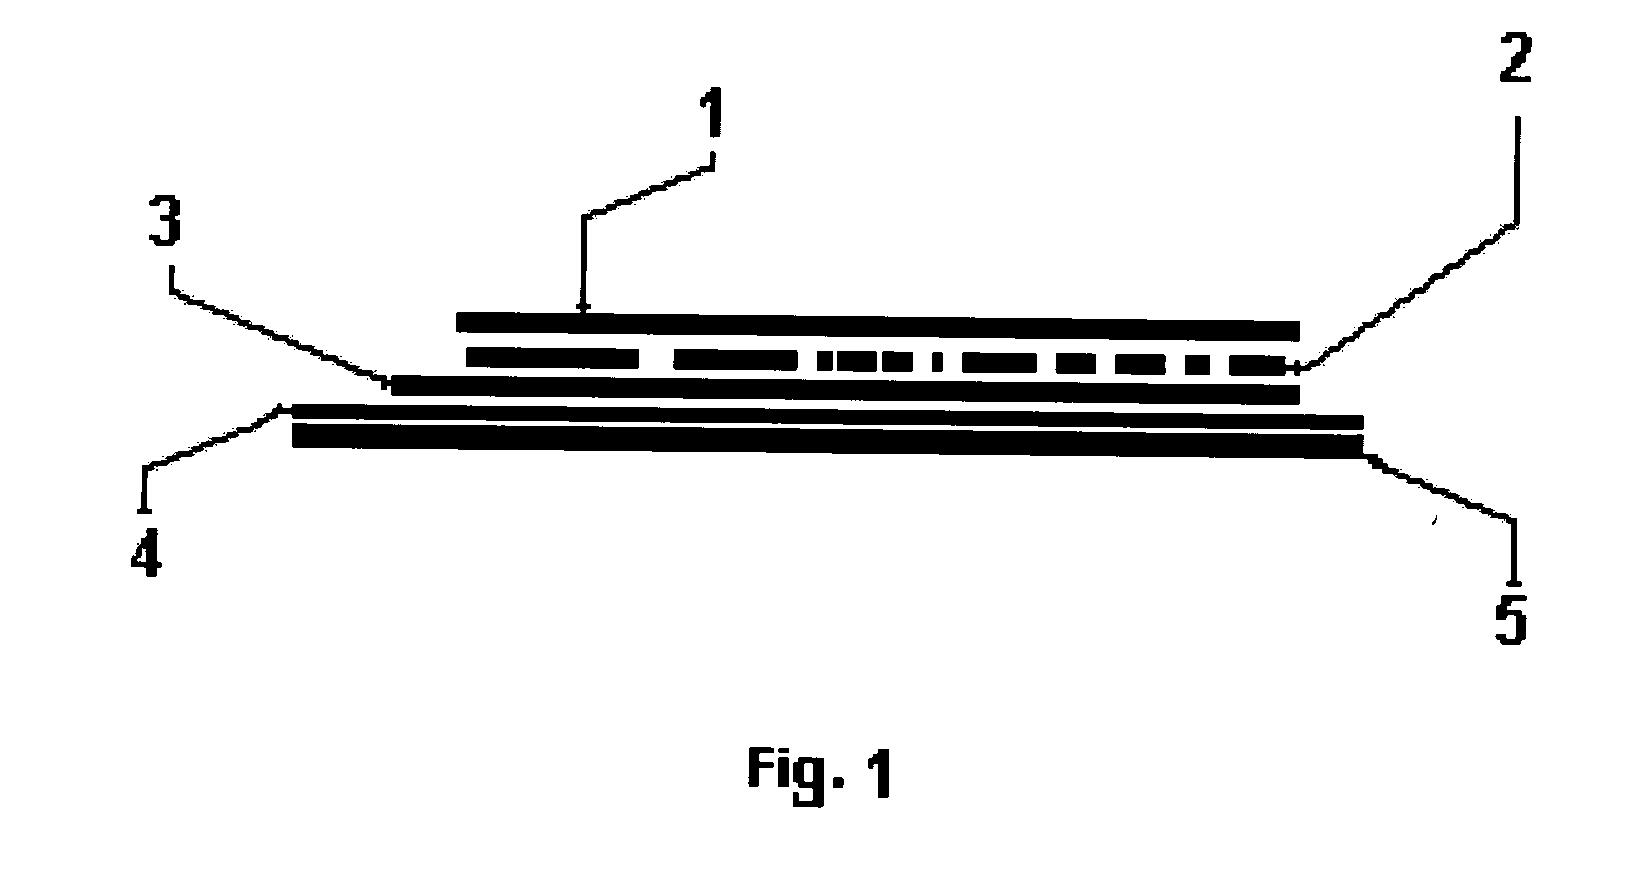 Removable adhesive for adhering an image to a surface and a method for removing the image